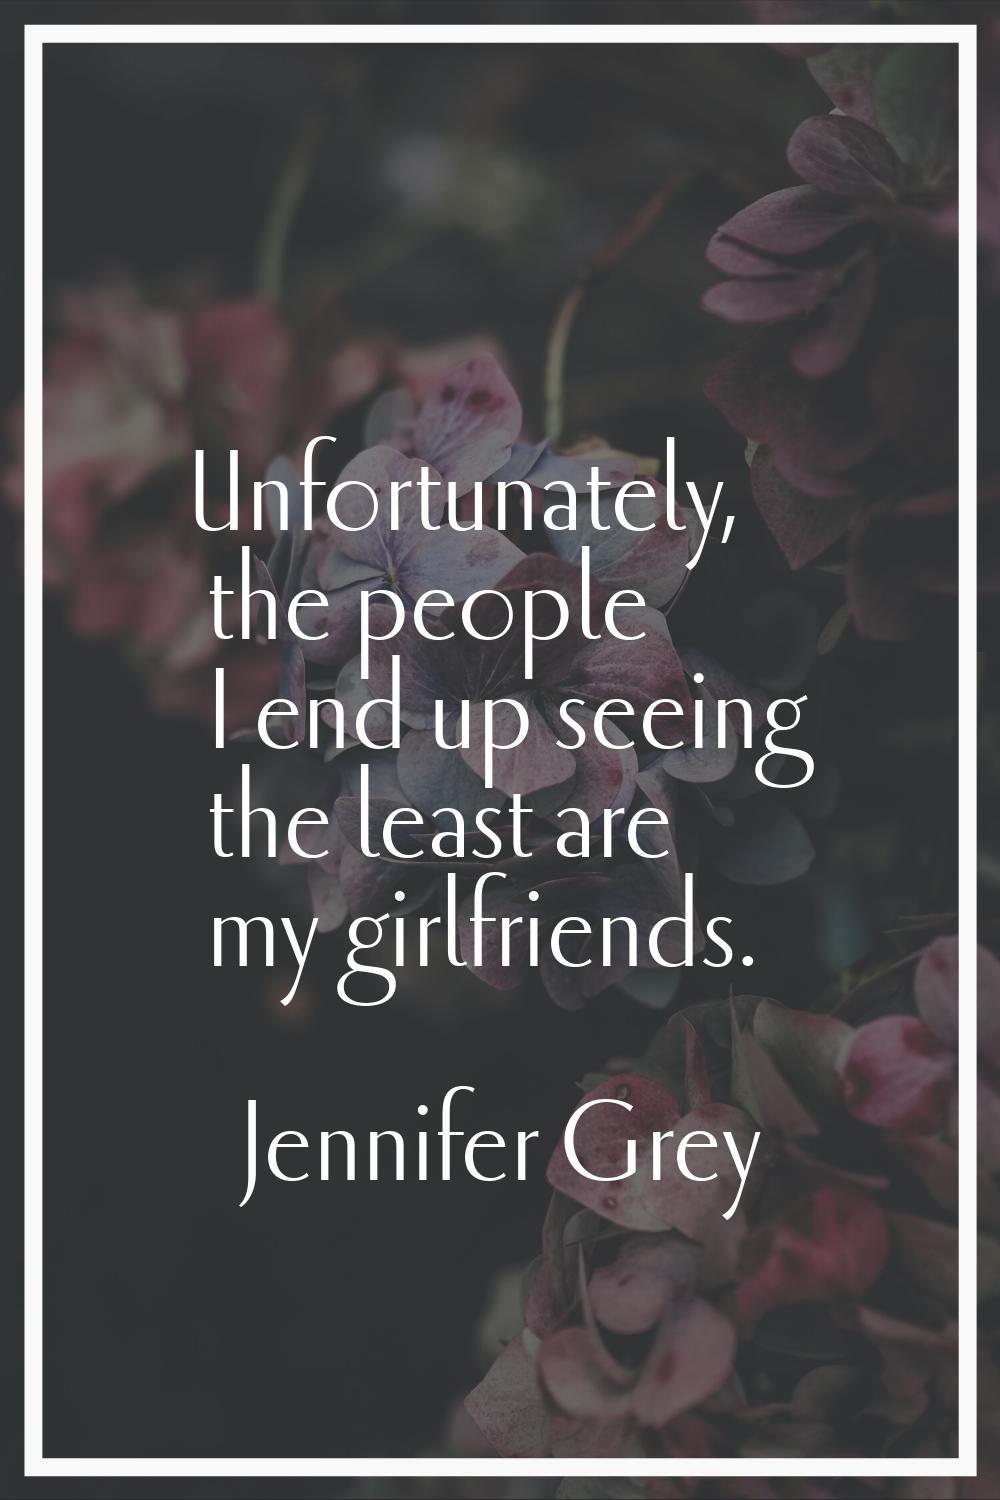 Unfortunately, the people I end up seeing the least are my girlfriends.